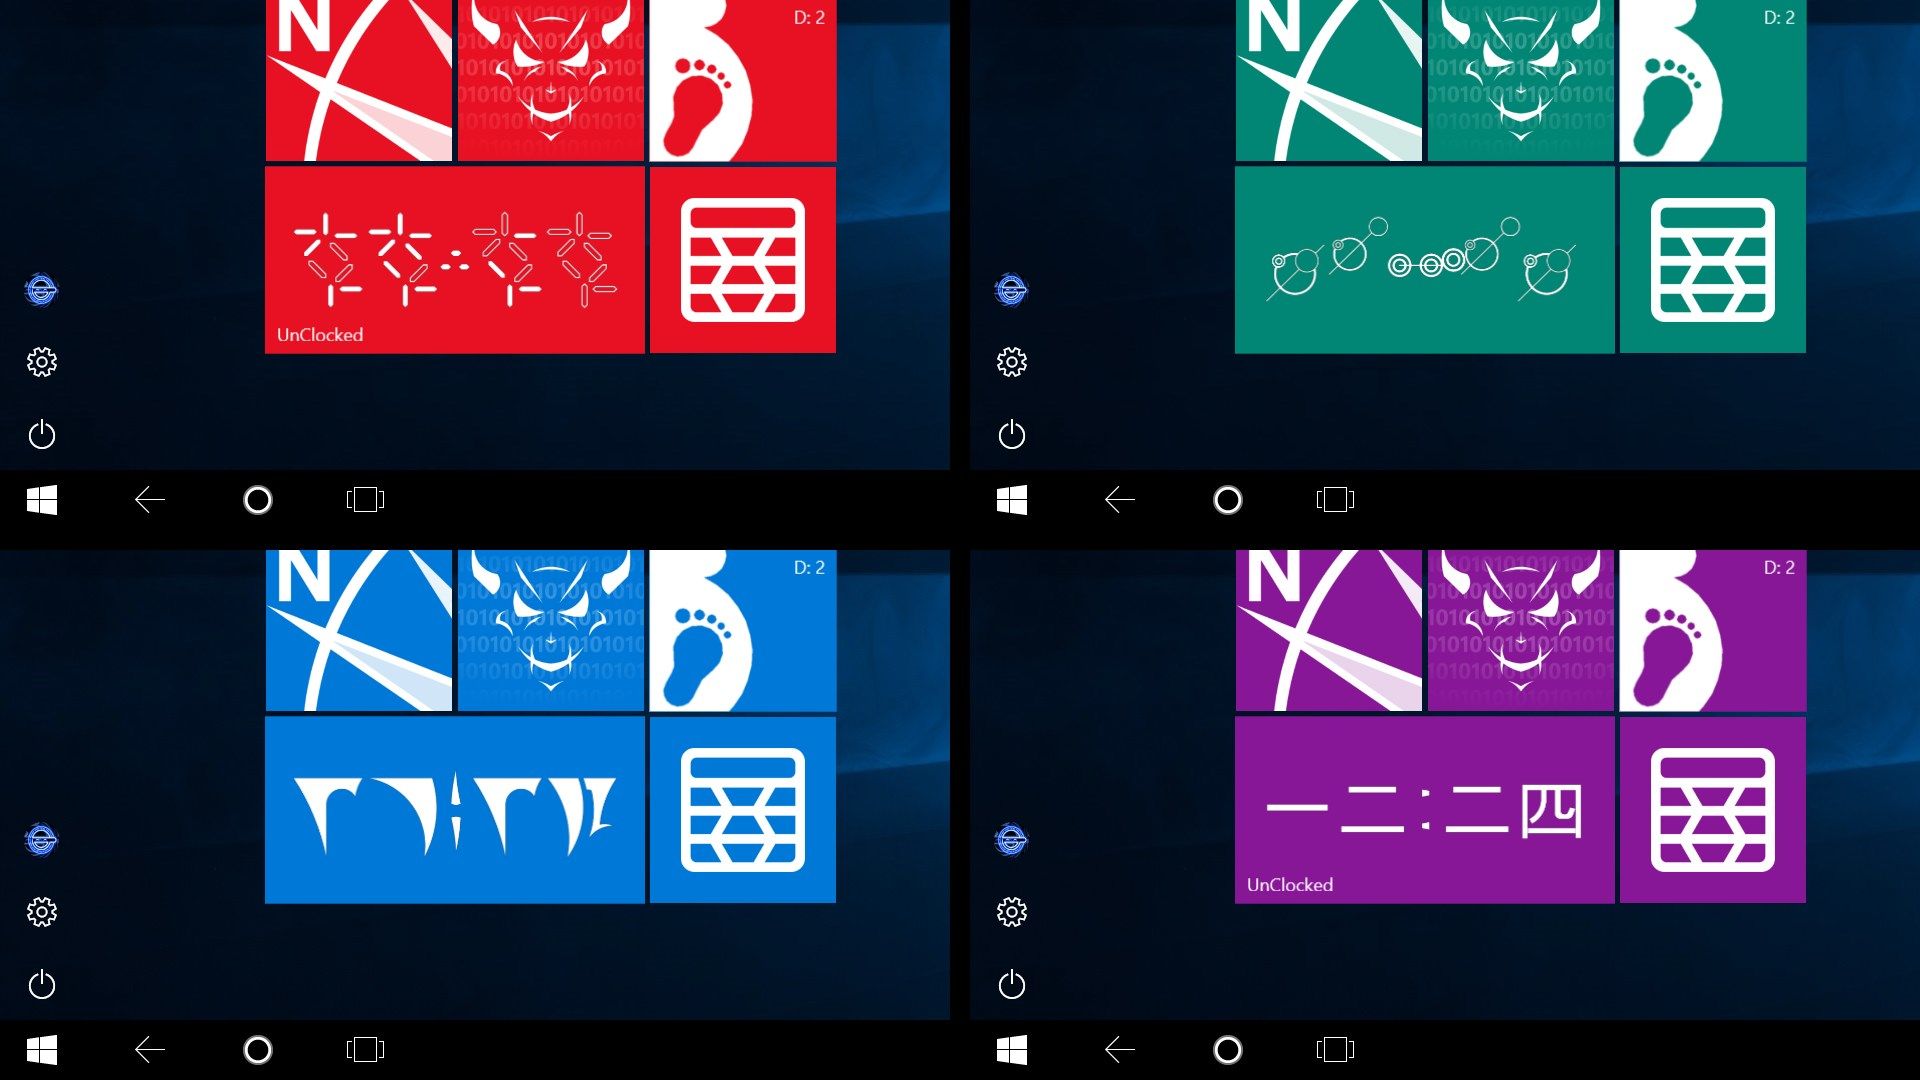 UnClocked live tile pinned to Start screen in different styles